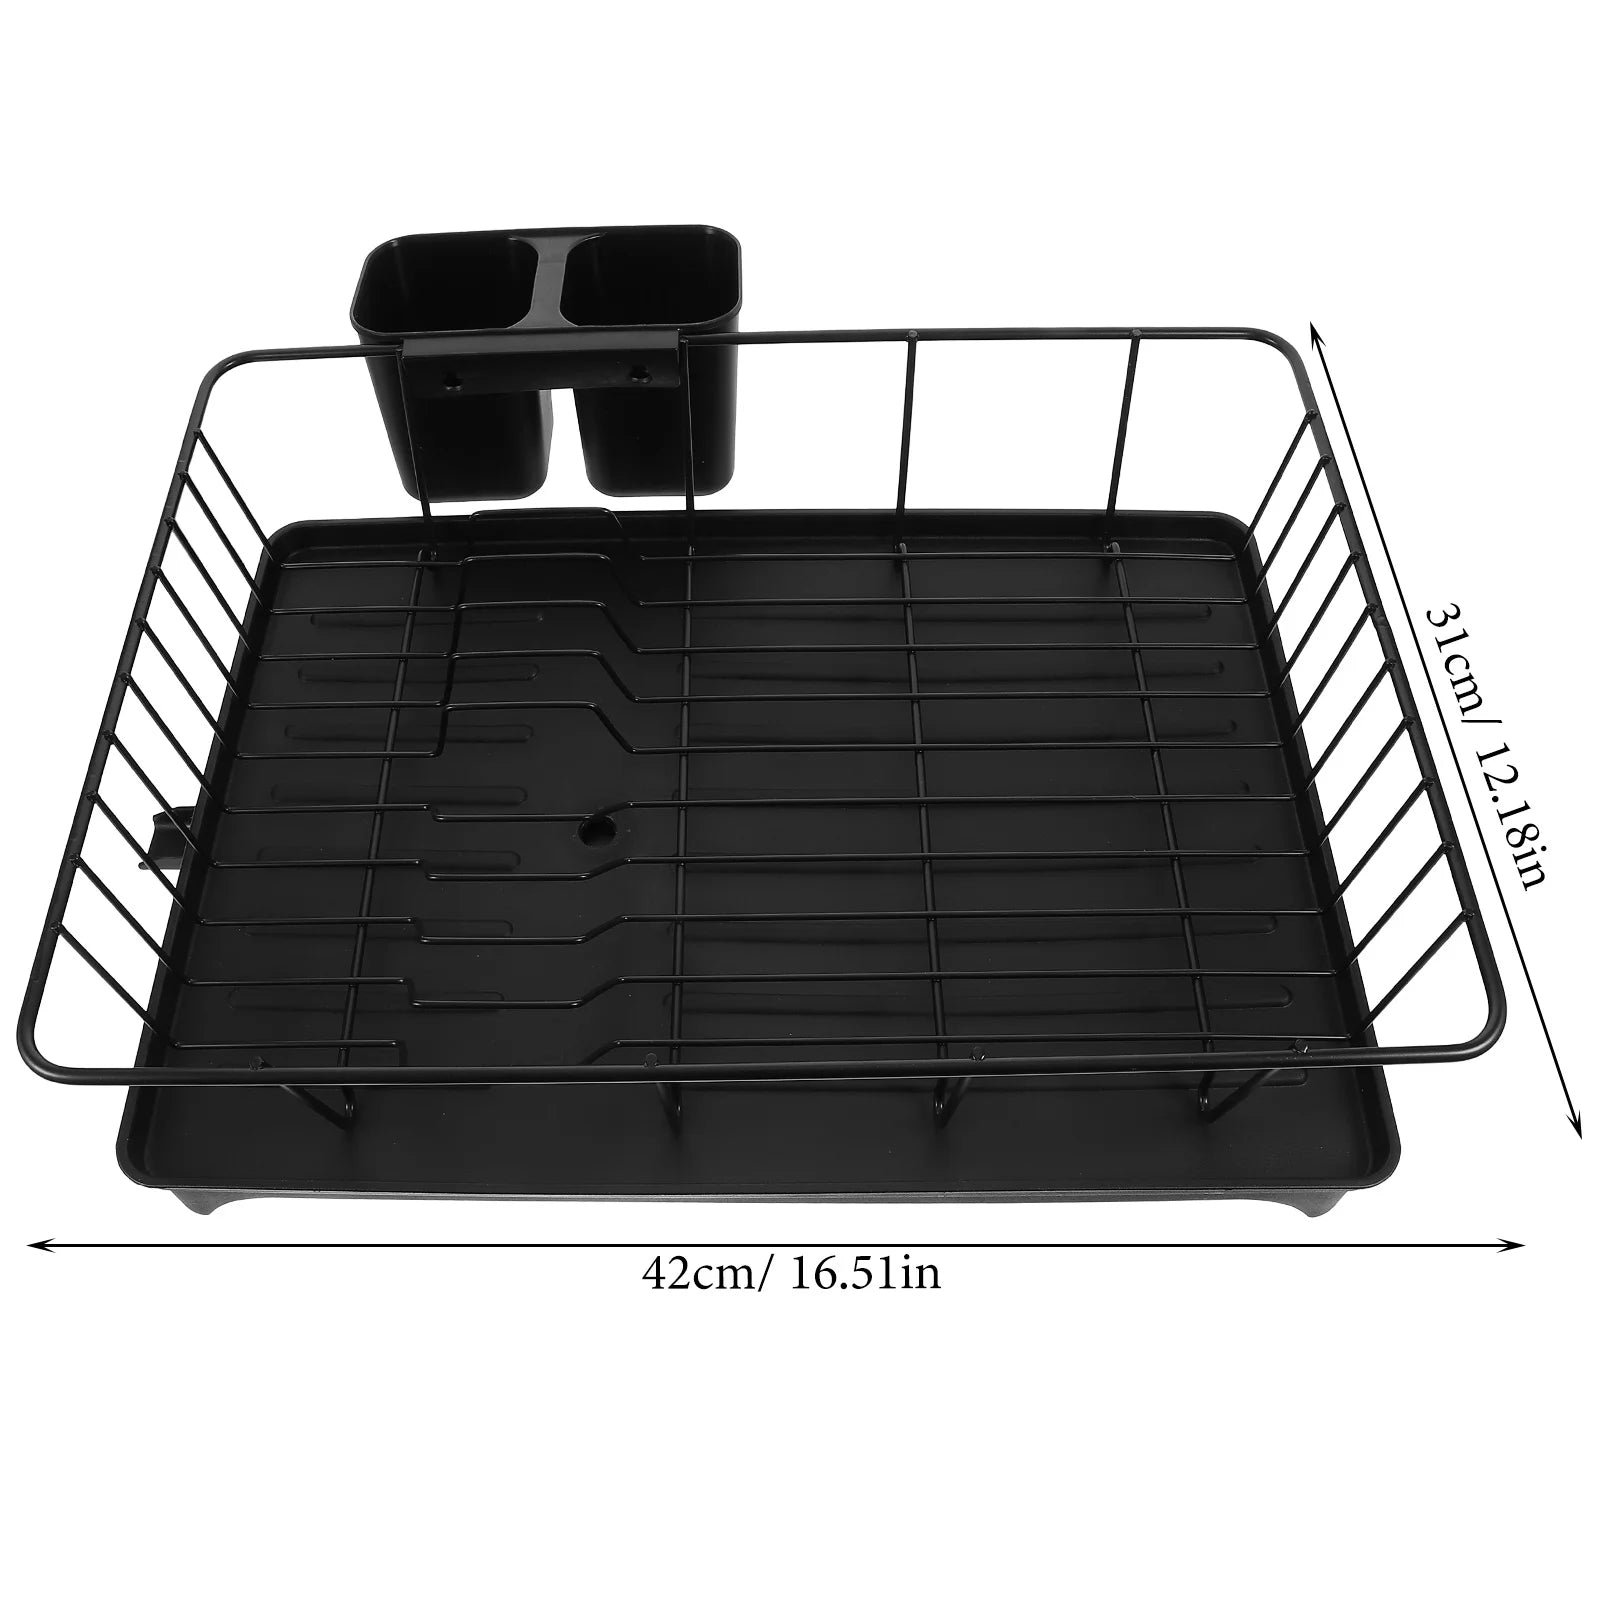 Clothes Drying Rack Dish Strainers Kitchen Counter Dishes High Capacity Metal Drainer Sink Islands